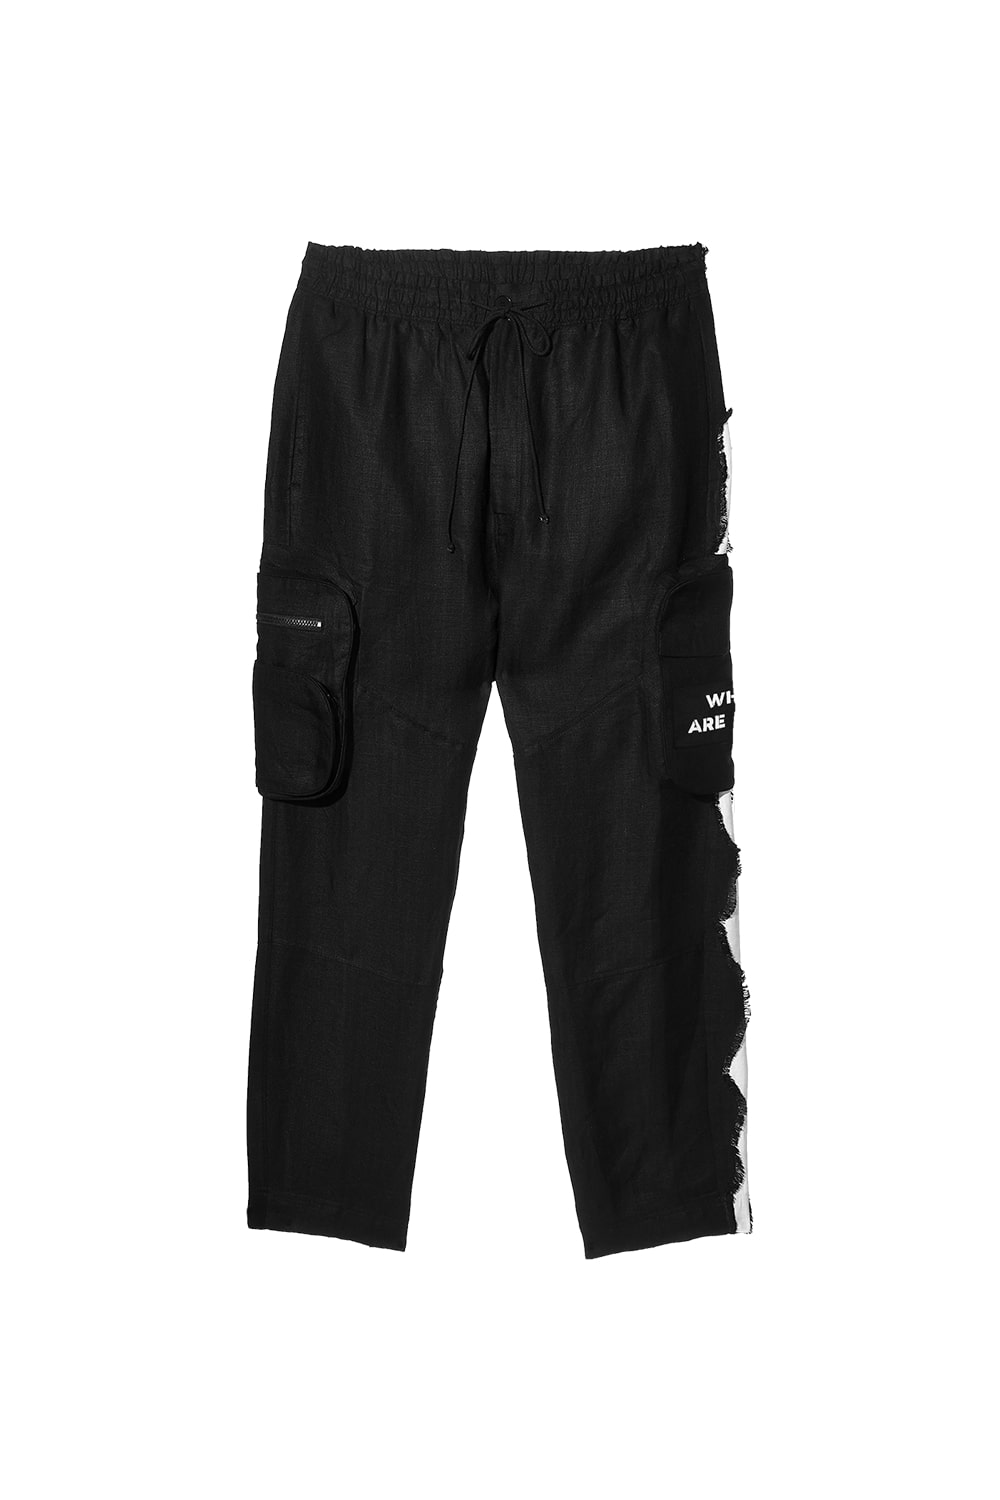 Rebirth Redemption Trousers